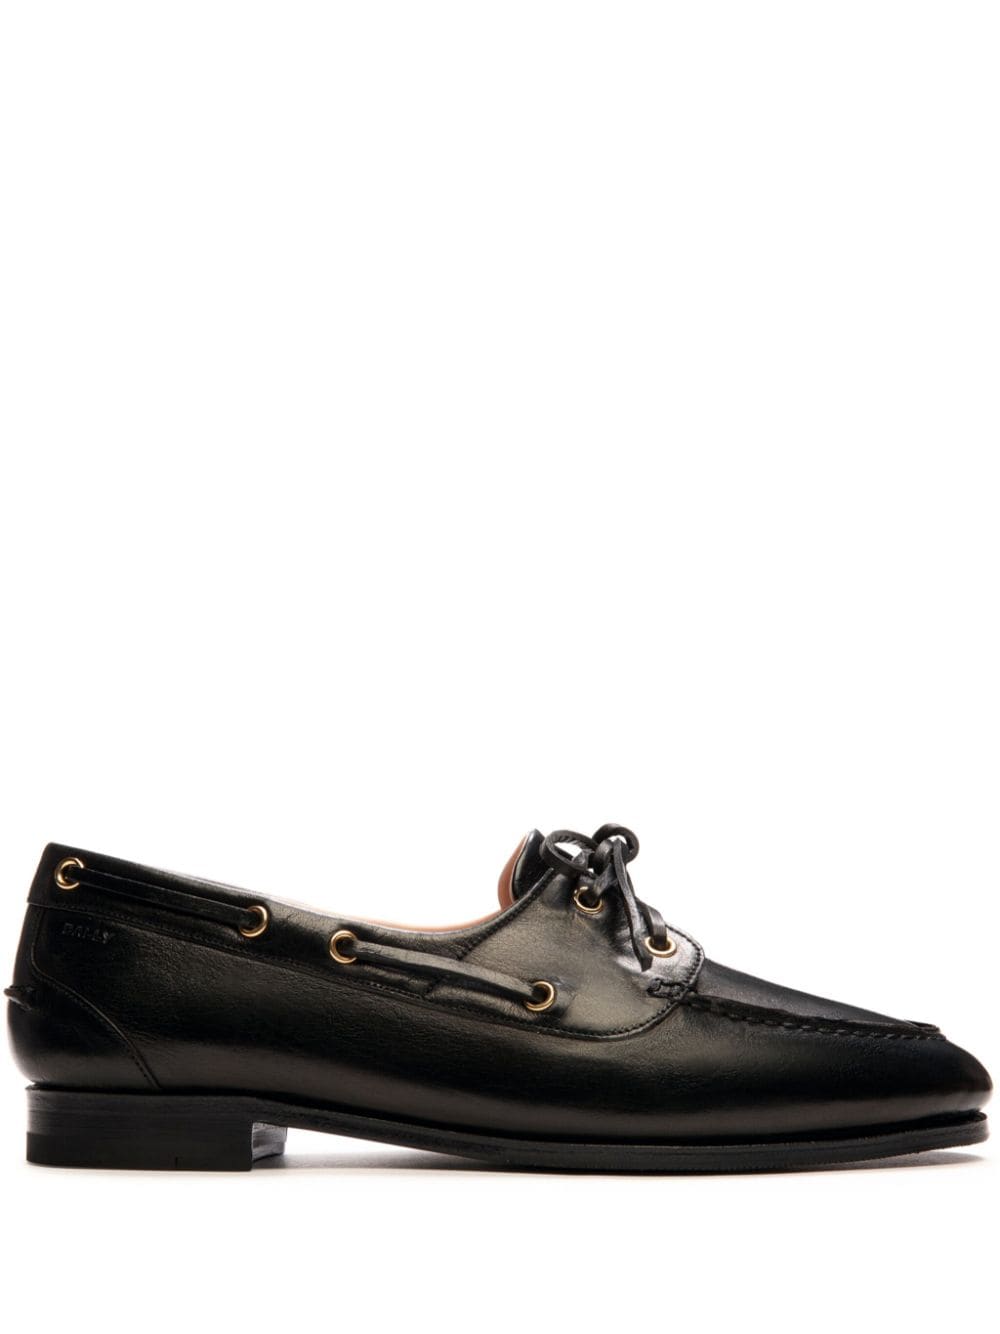 Bally Pathy leather Derby shoes Black